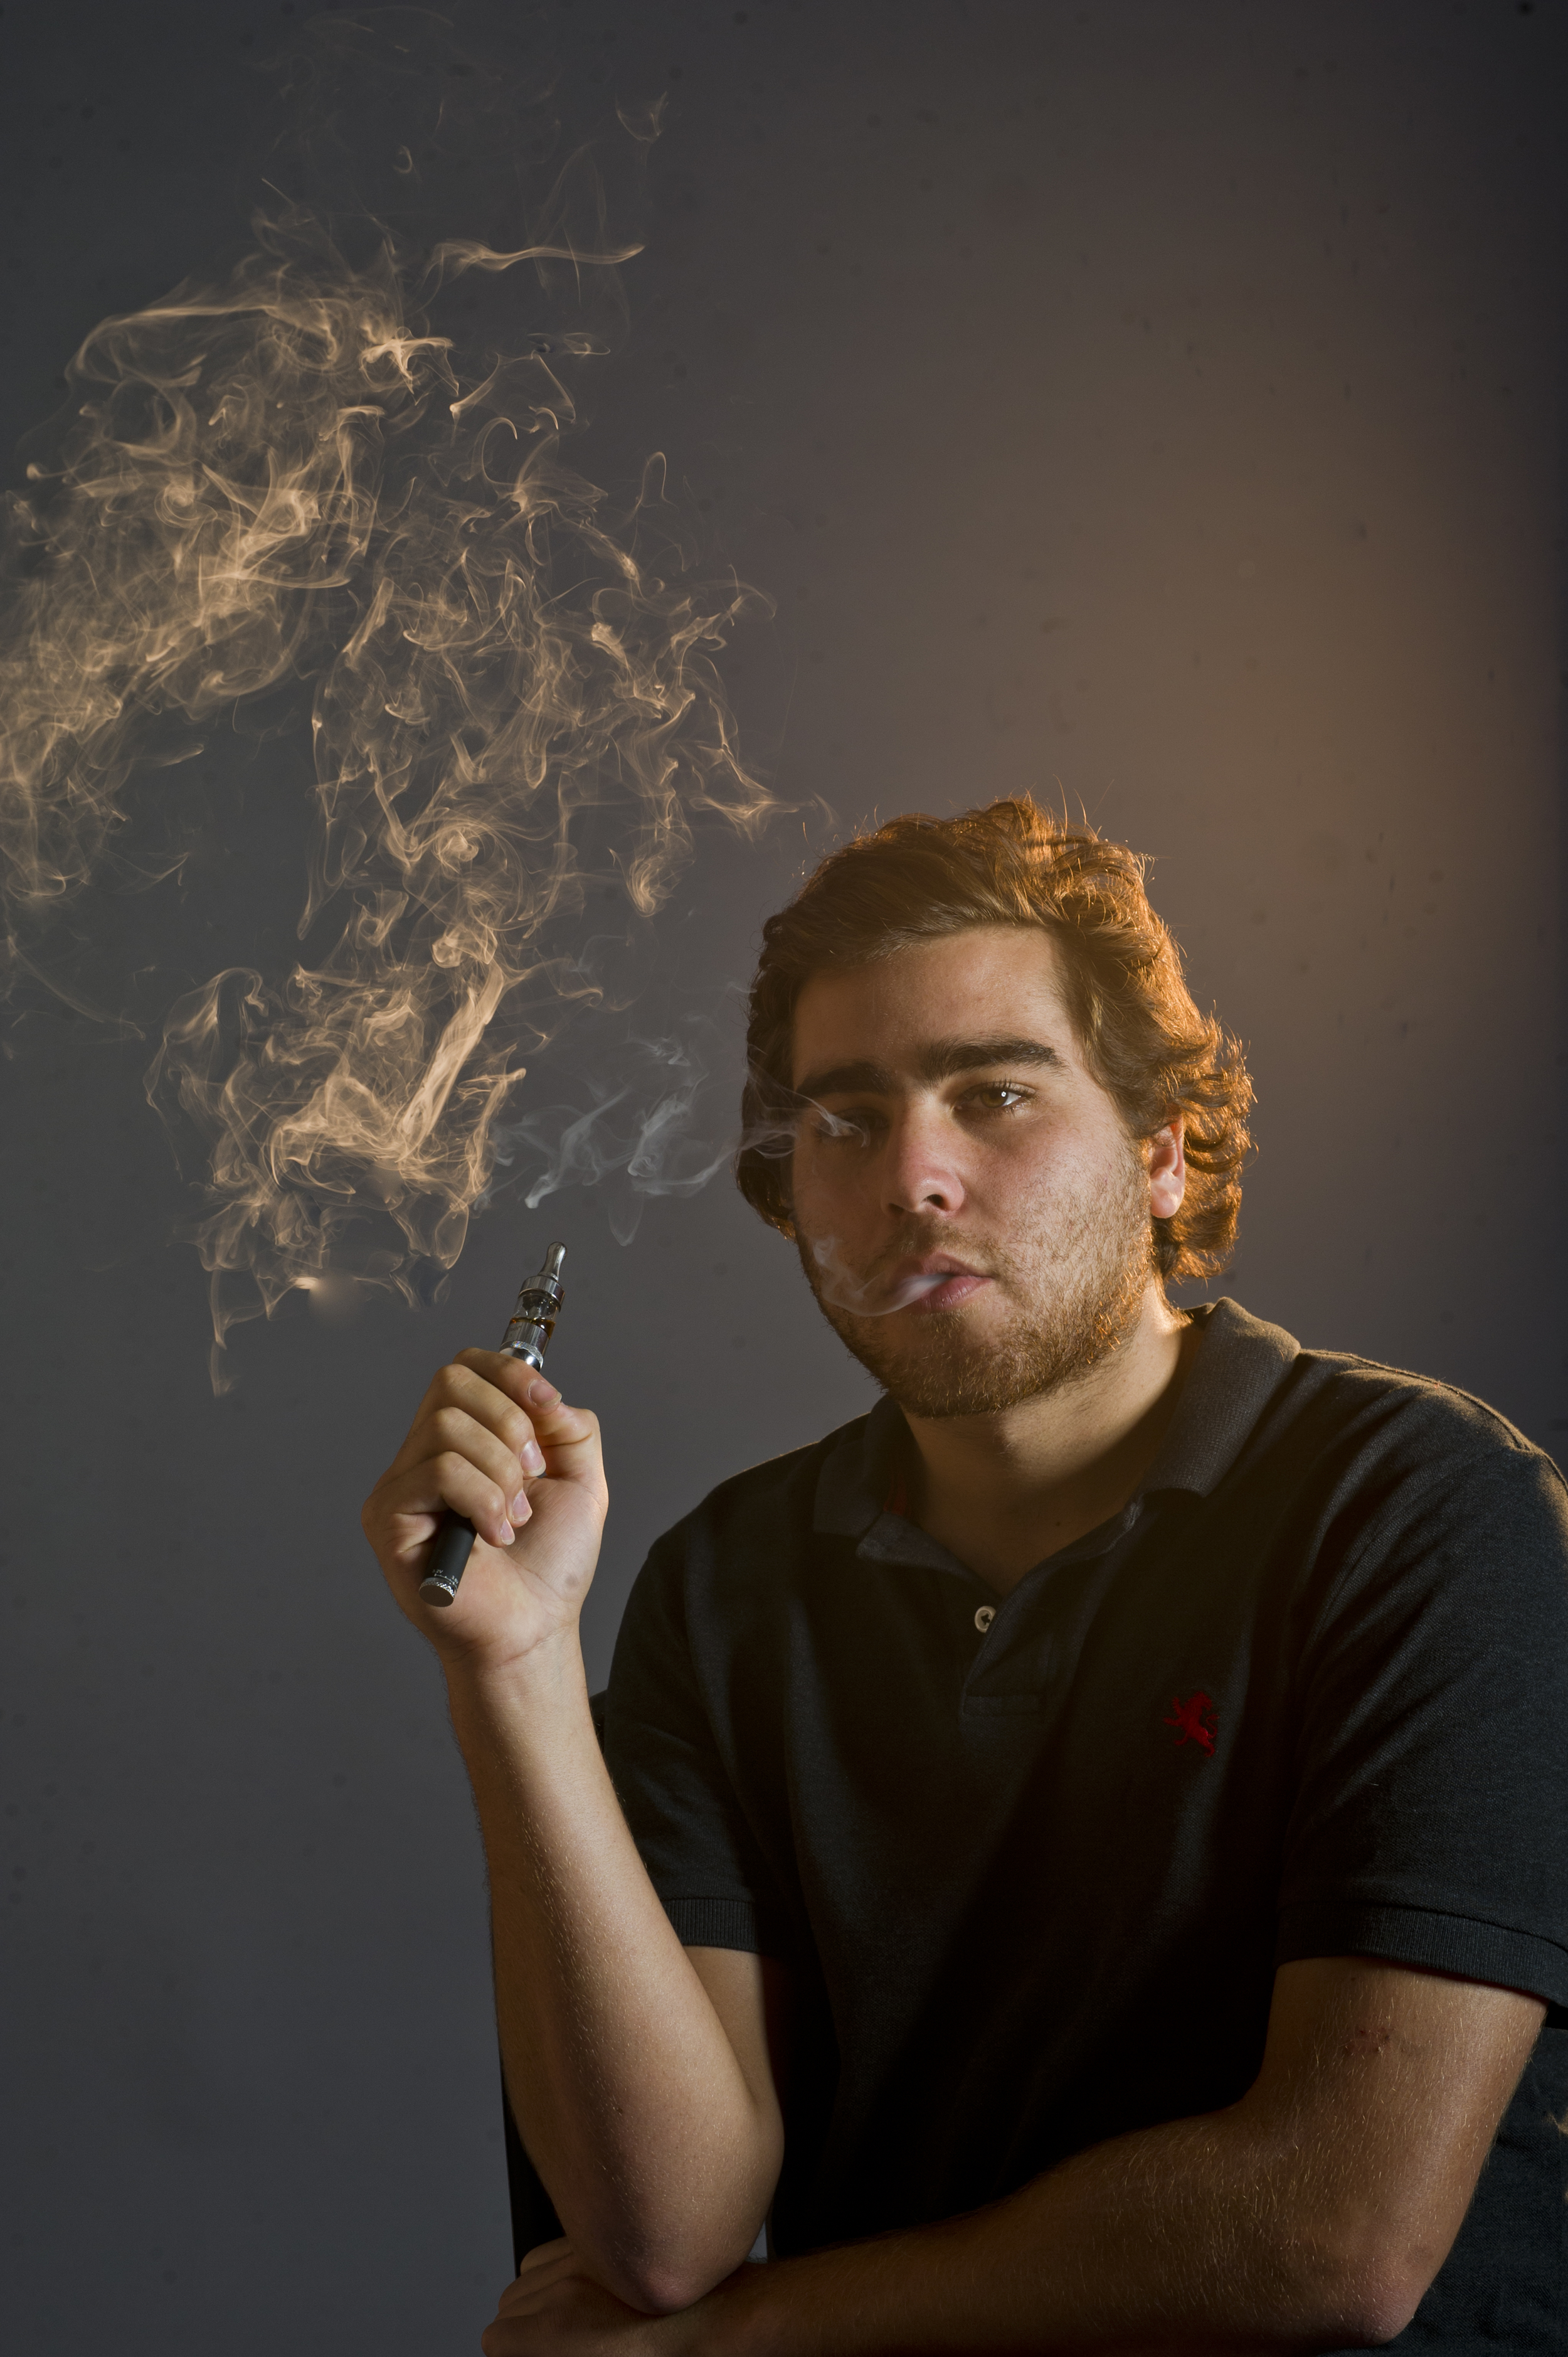  For a story about vaping. Photo by Cydney Scott for Boston University Photography 